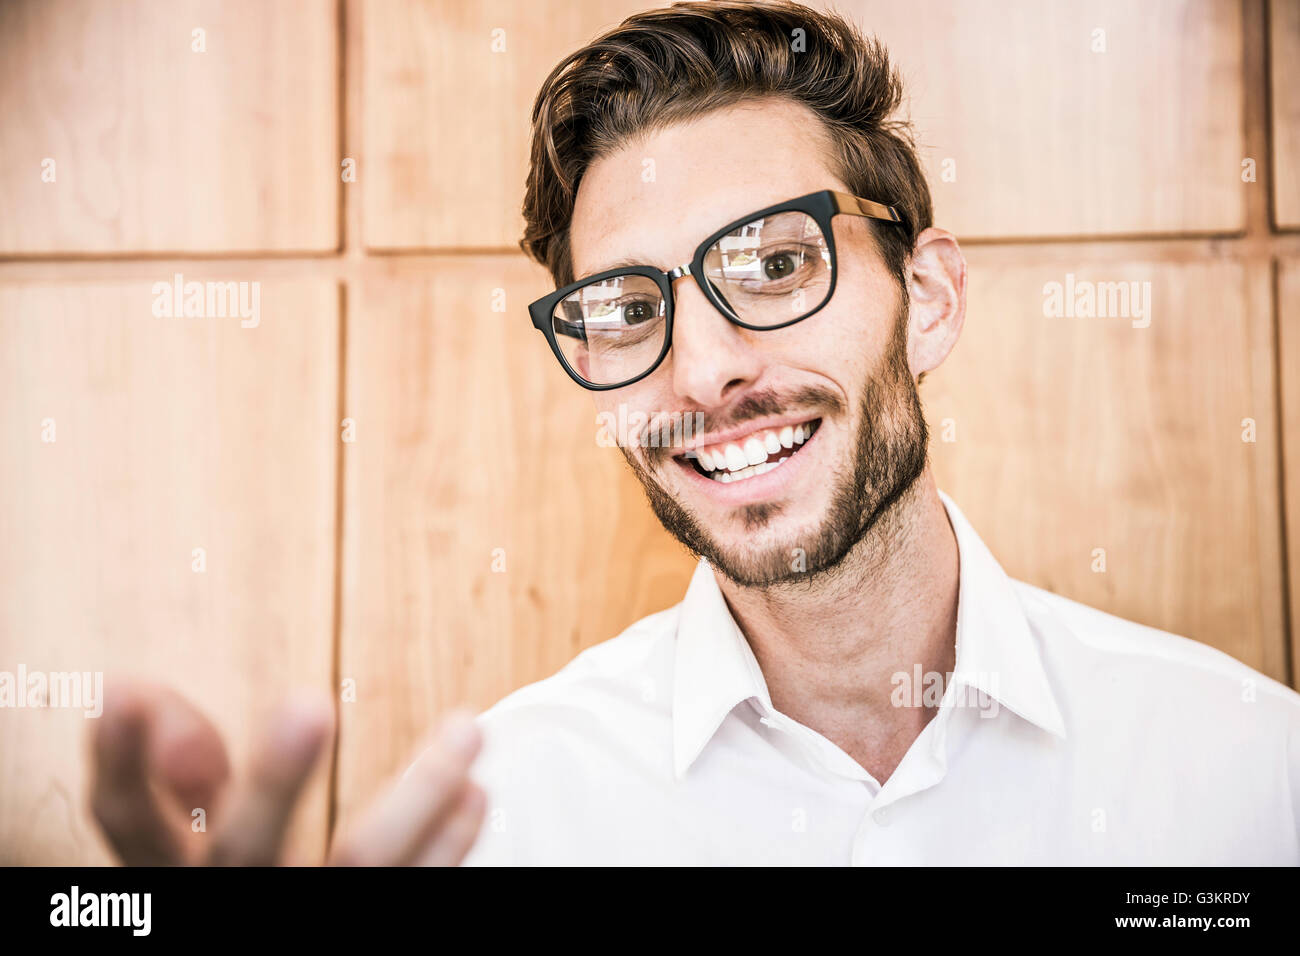 Young man wearing glasses looking at camera smiling, gesticulating Stock Photo